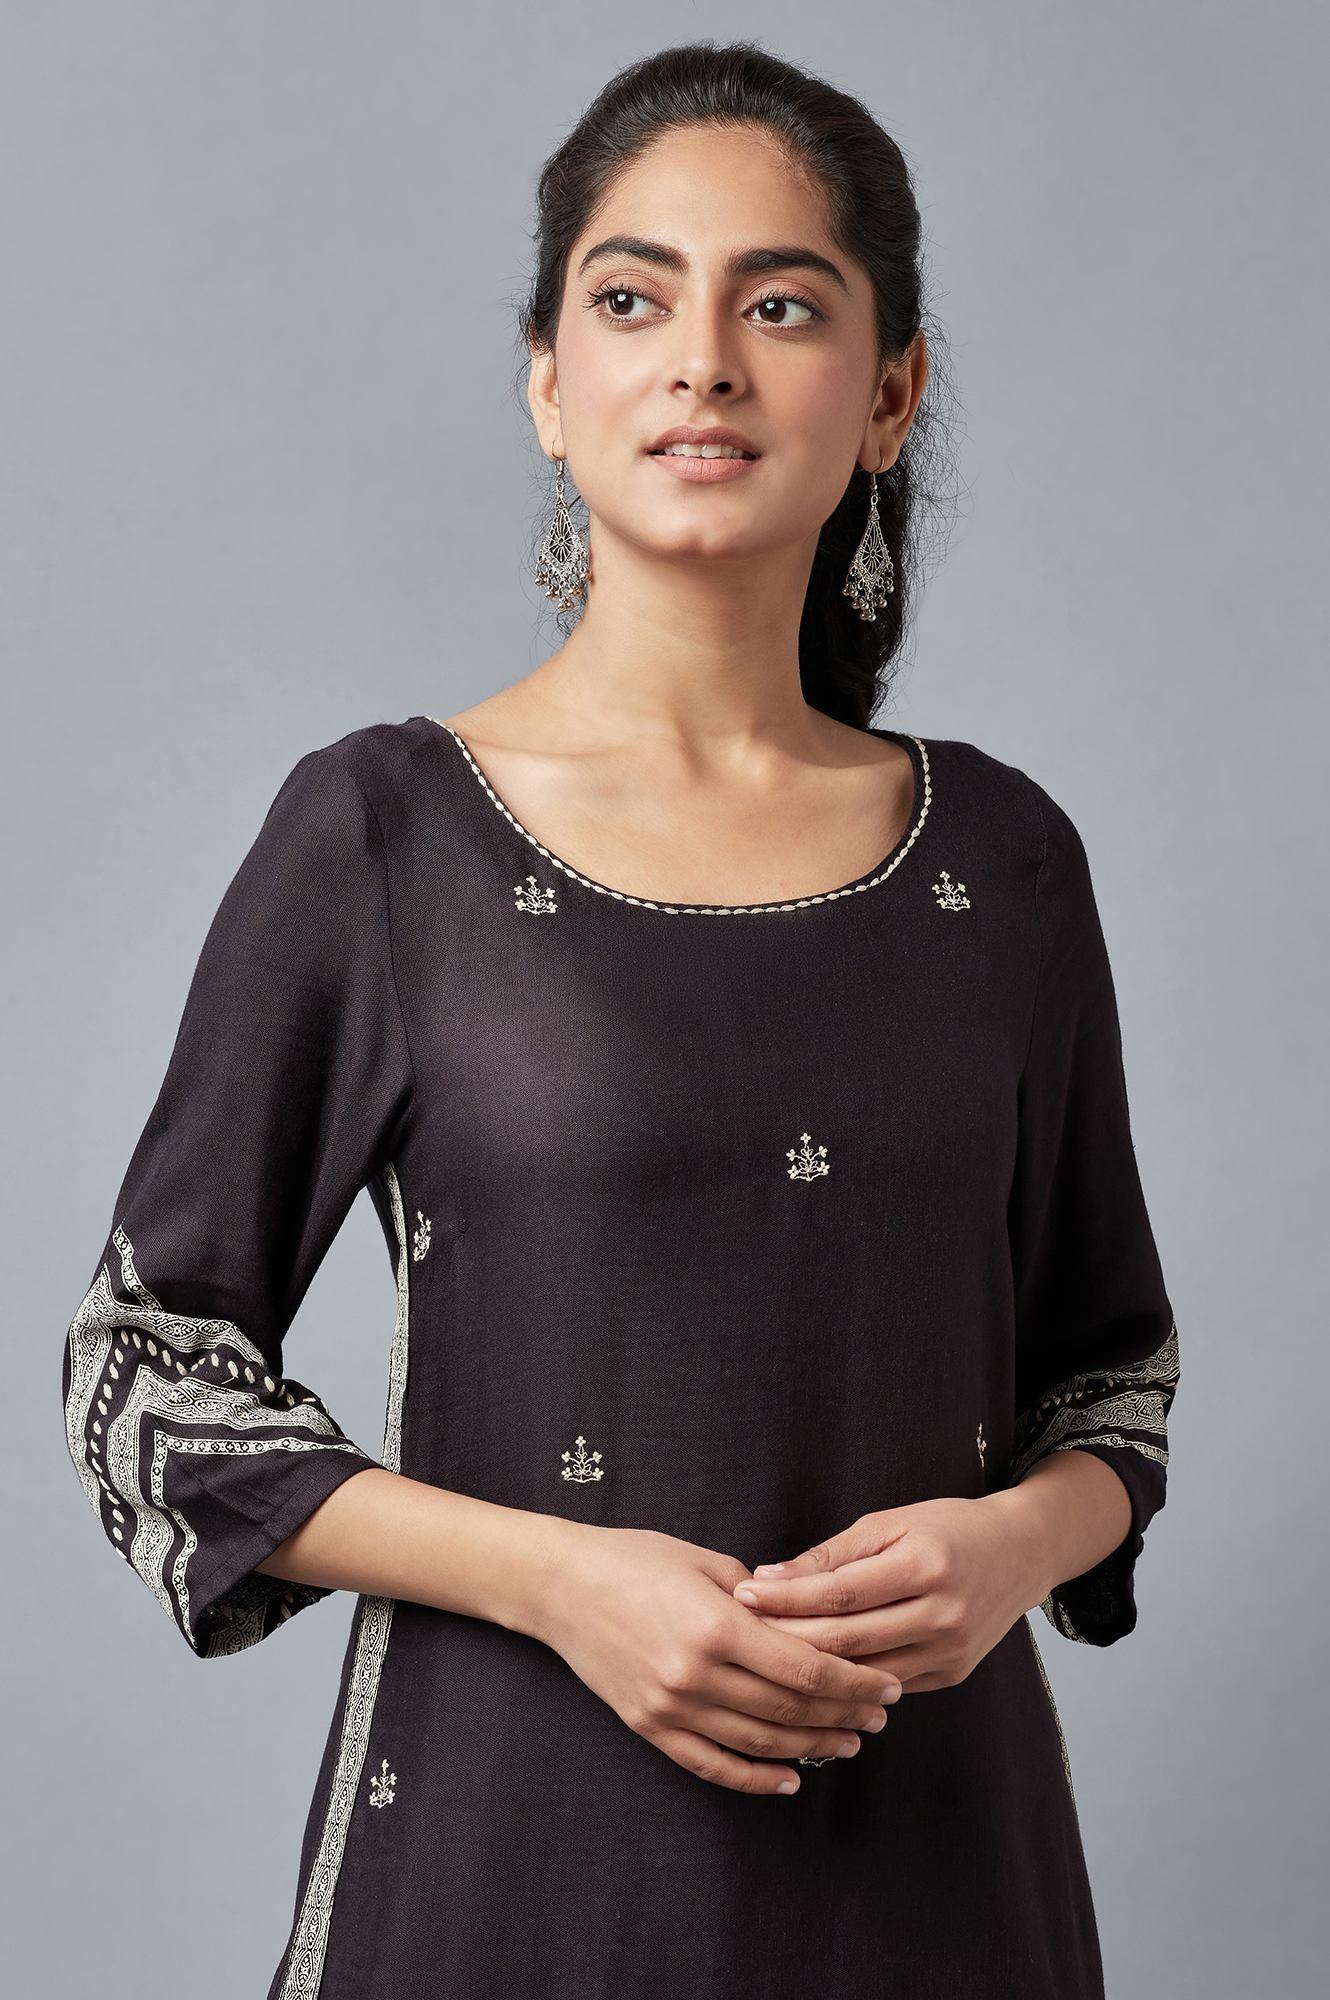 Black Embroidered kurta with Parallel Pants - wforwoman